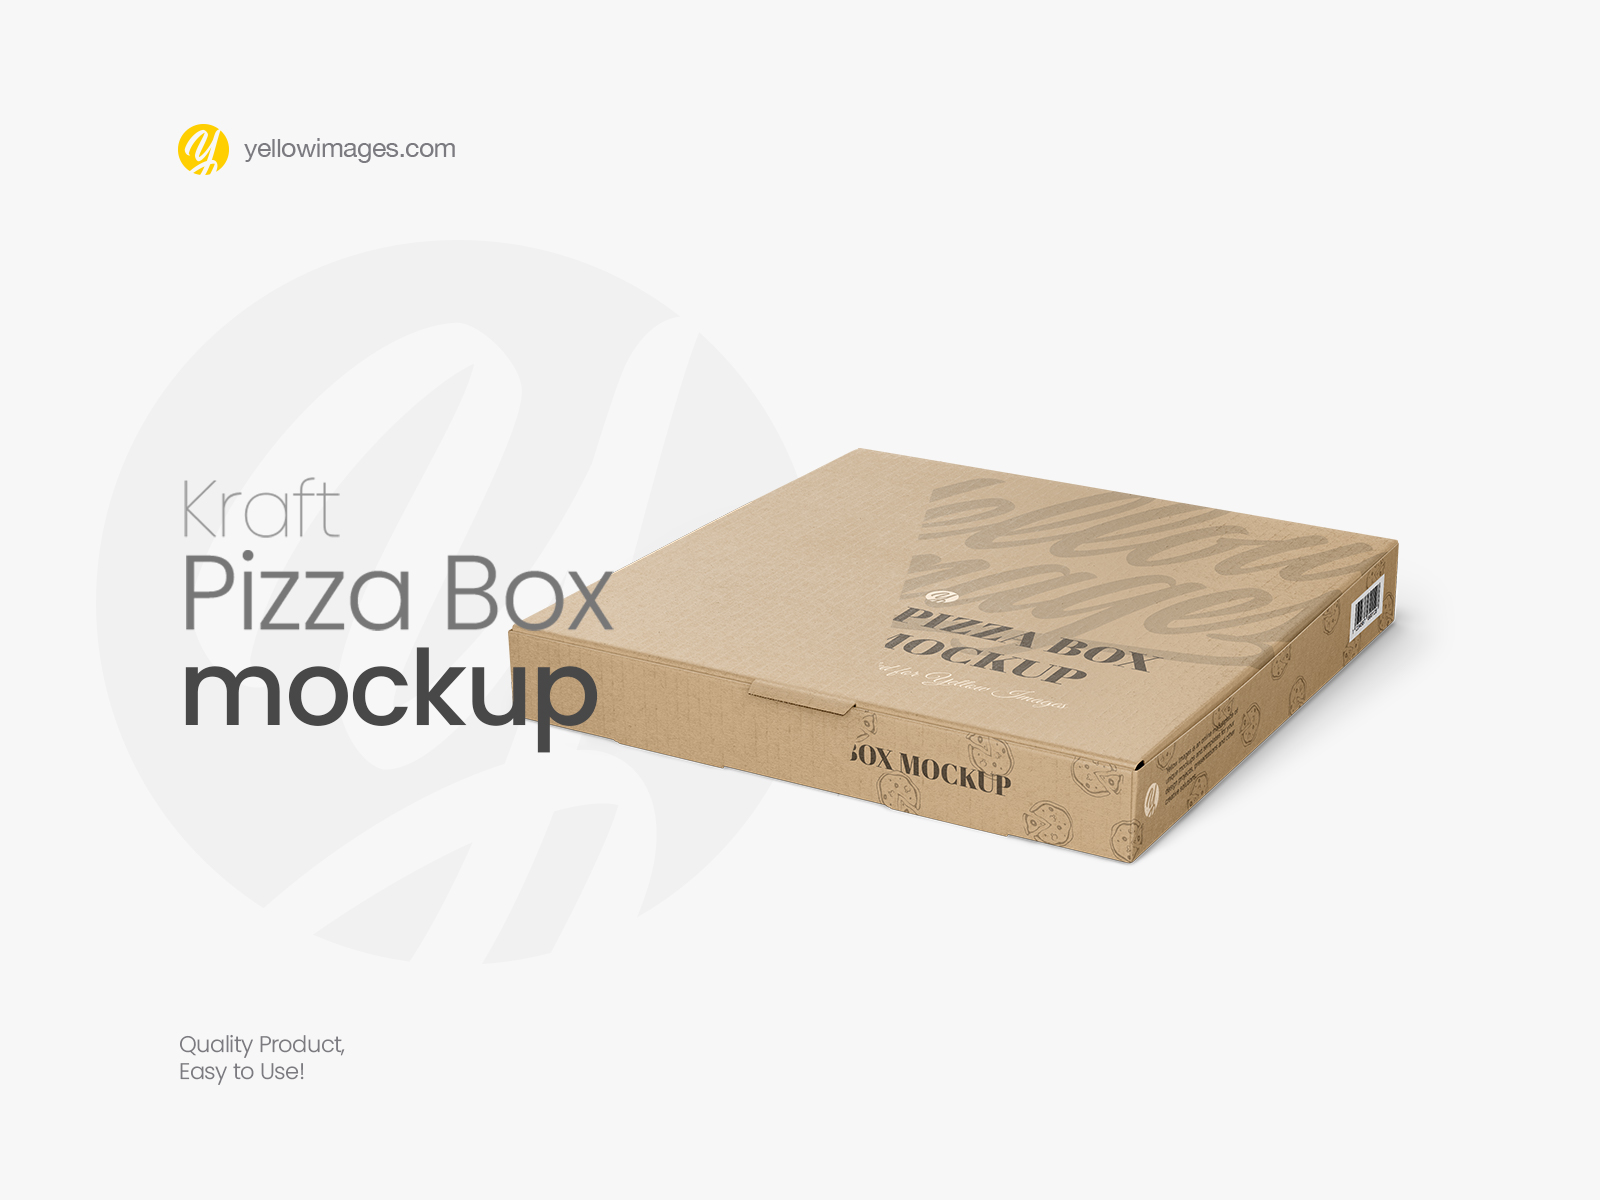 Download Square Kraft Box Mockup Download Free And Premium Psd Mockup Templates And Design Assets Yellowimages Mockups